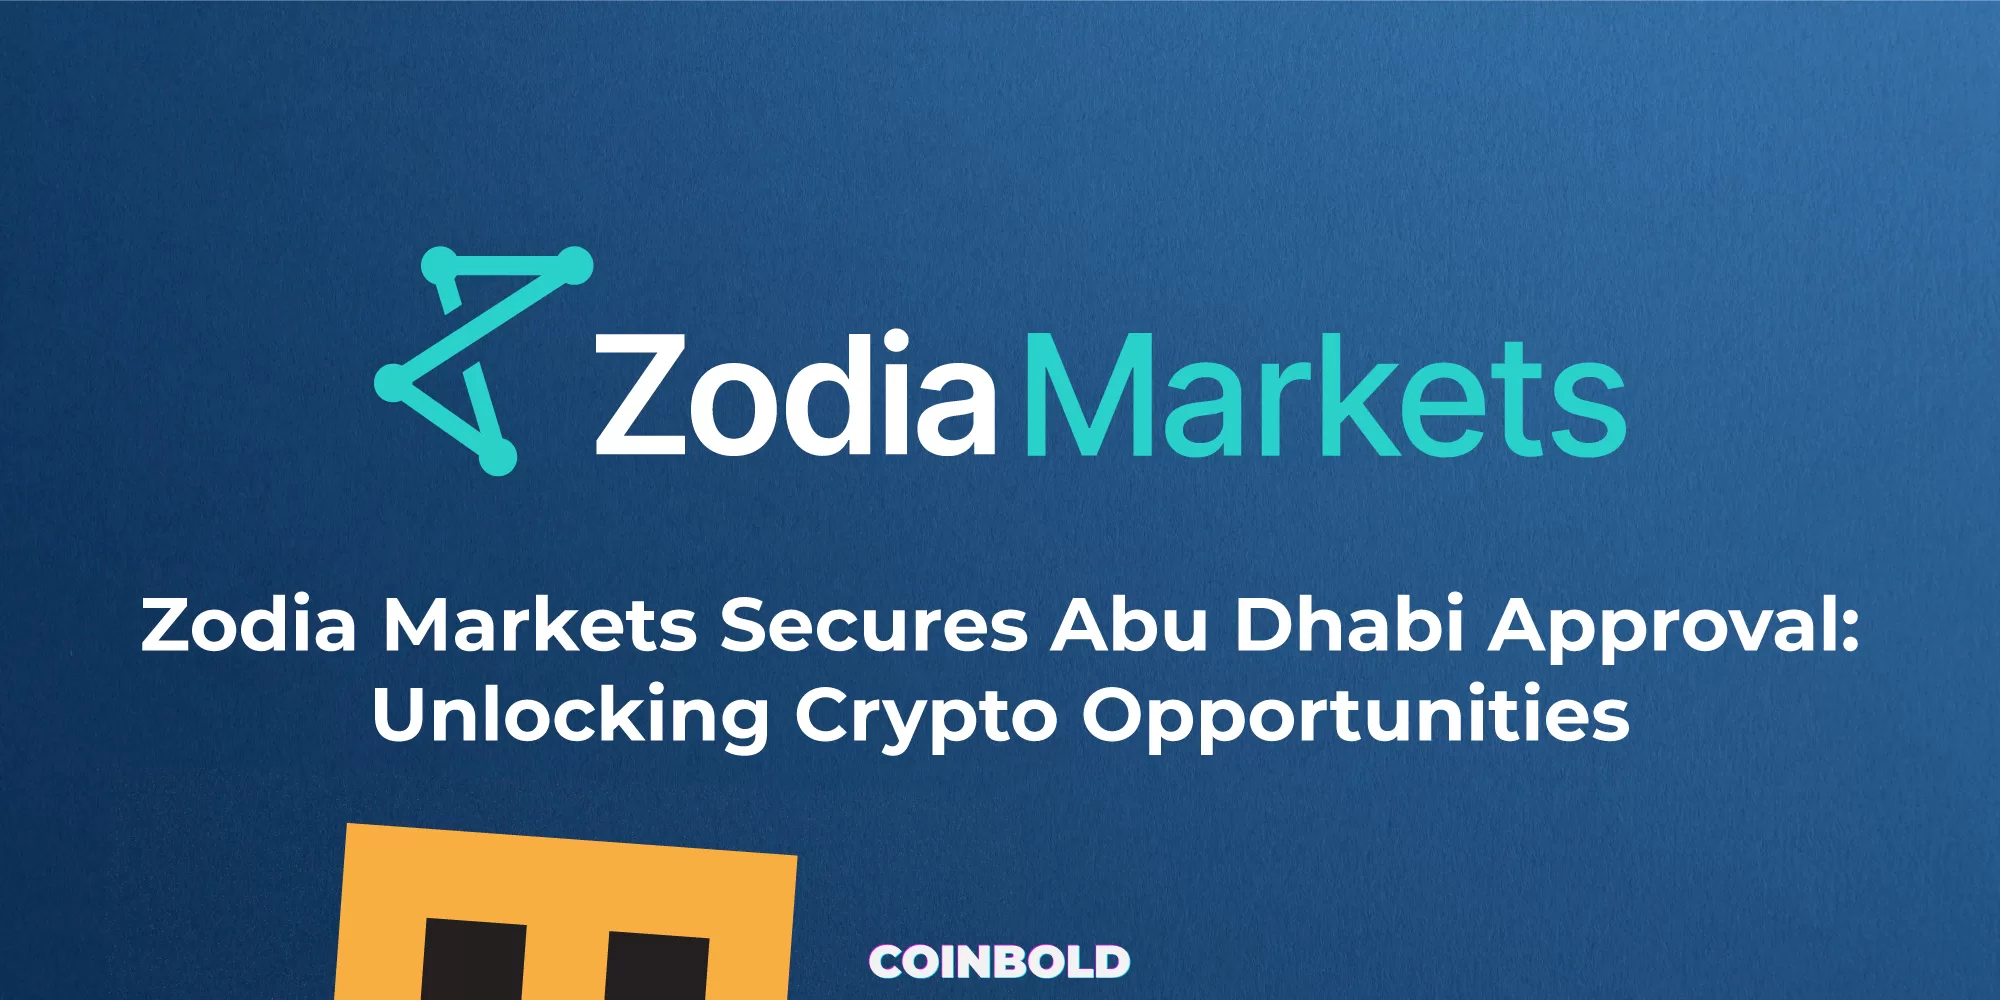 Zodia Markets Secures Abu Dhabi Approval Unlocking Crypto Opportunities jpg.webp